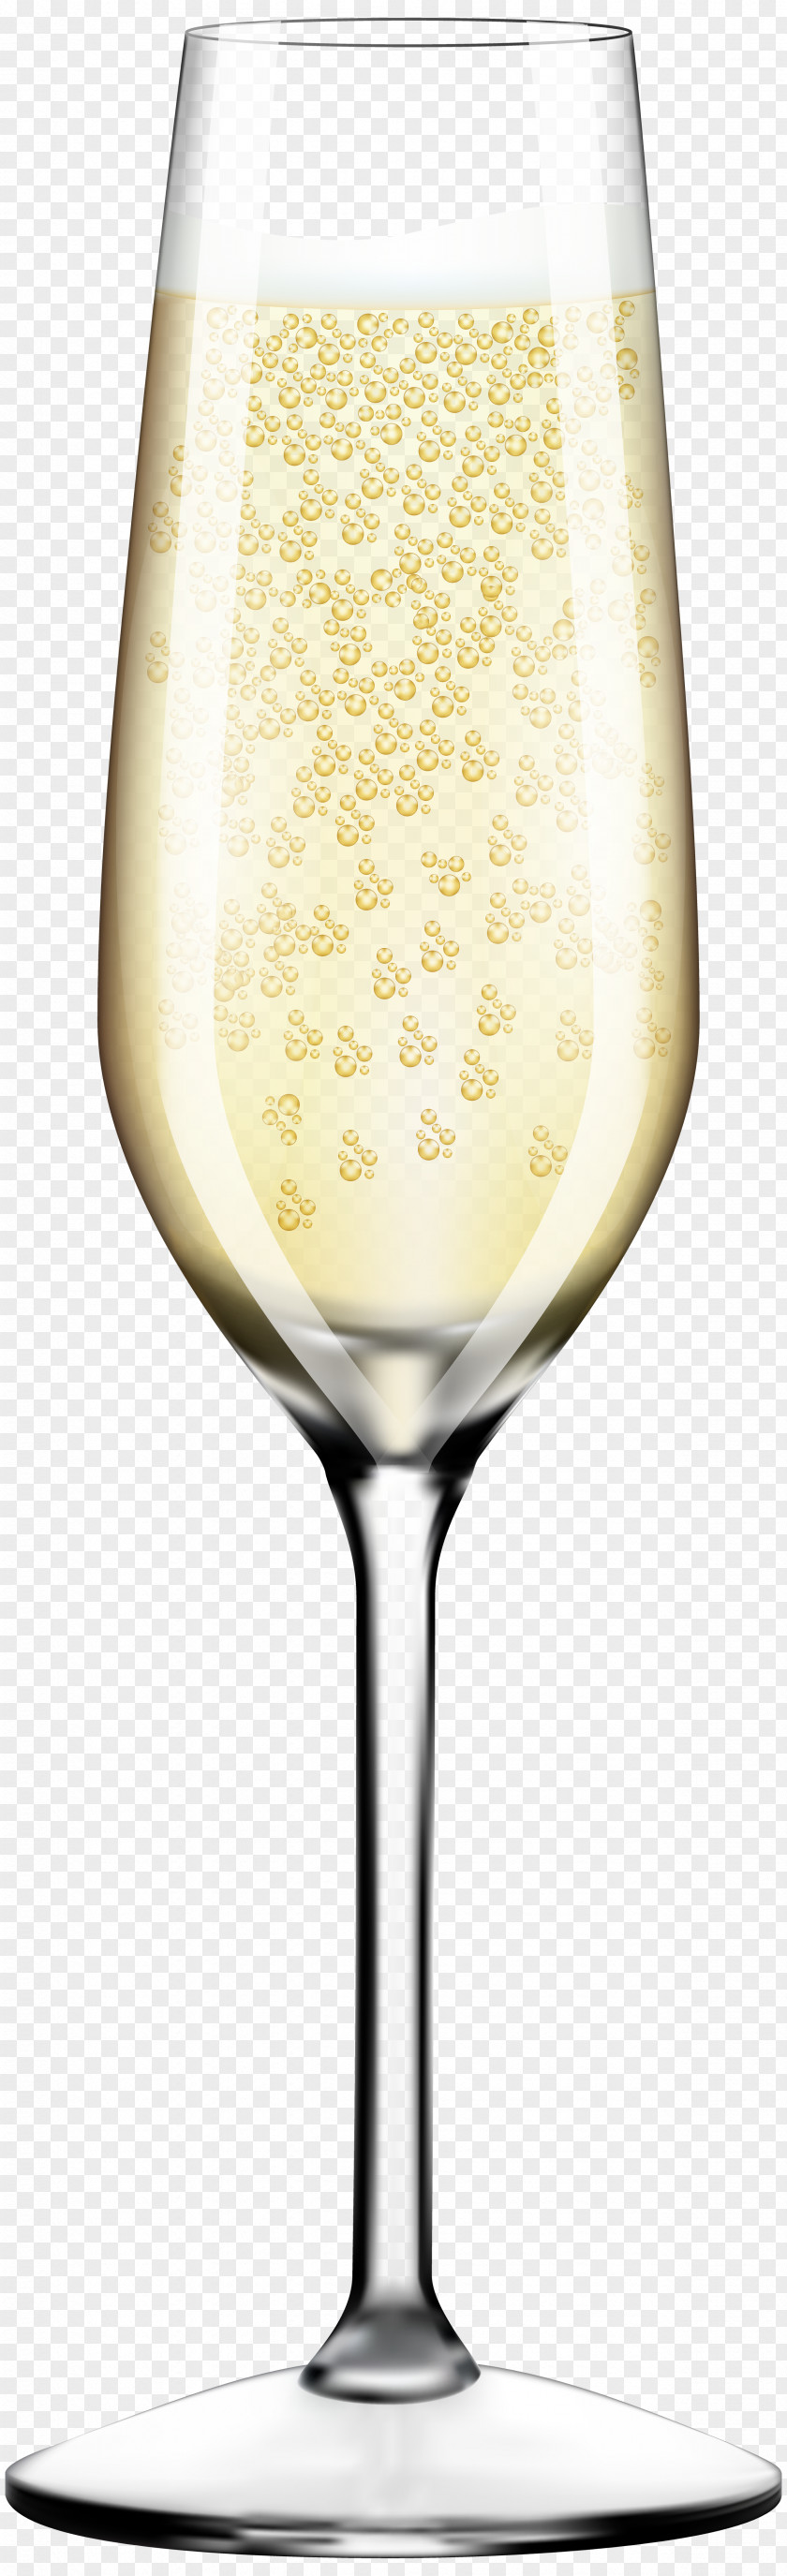 Champagne Glass Clip Art Image White Wine Cocktail Beer PNG